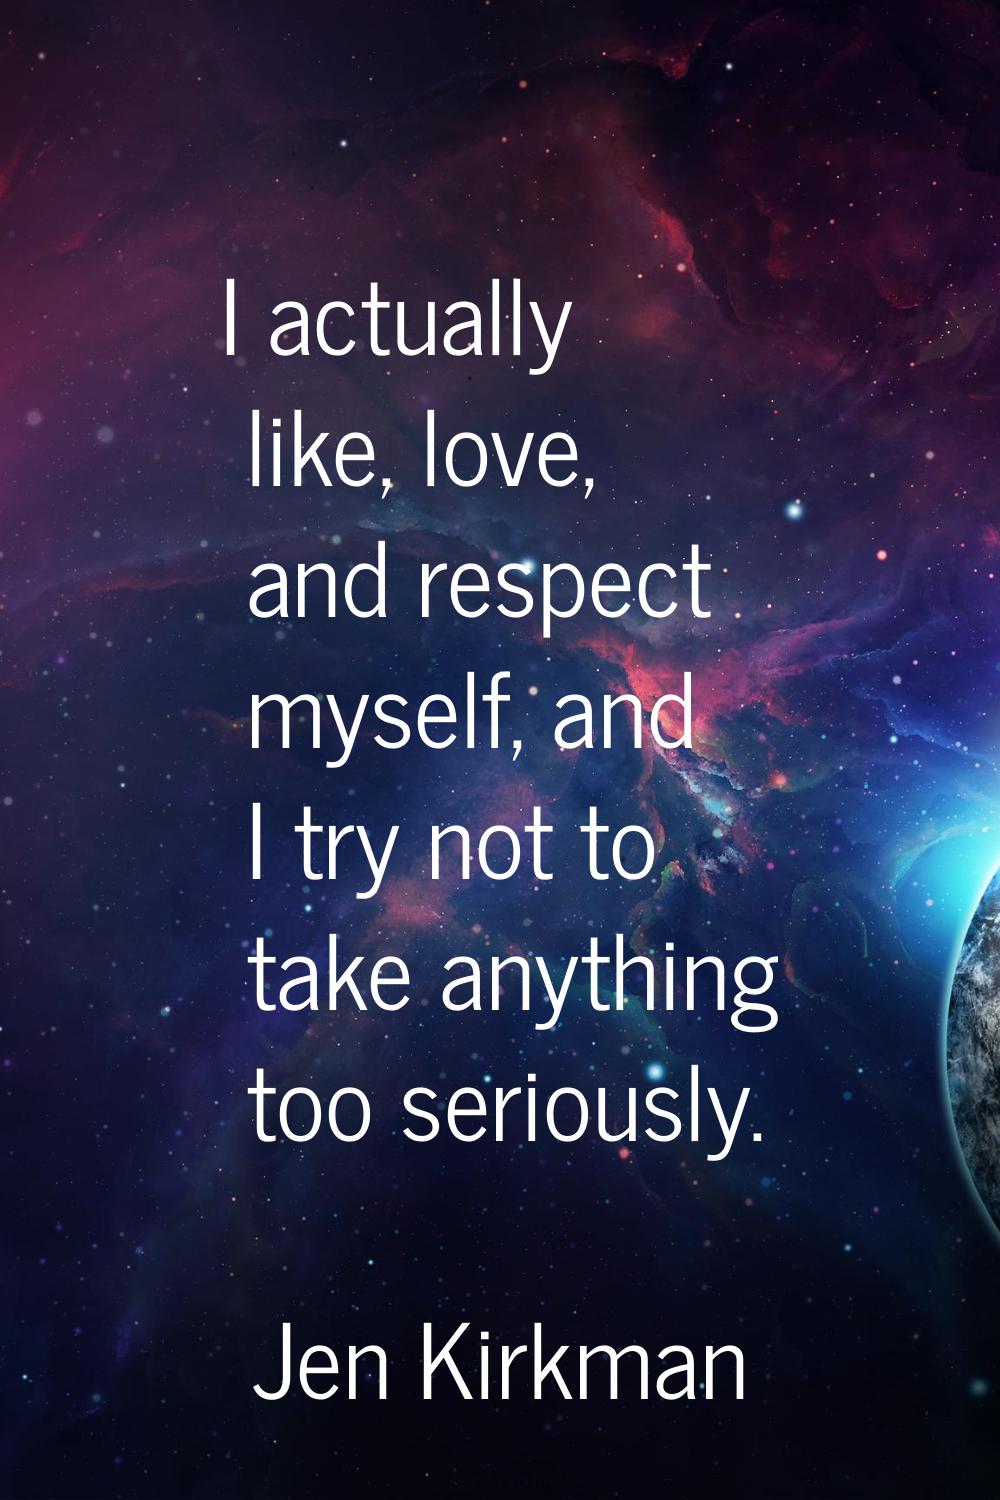 I actually like, love, and respect myself, and I try not to take anything too seriously.